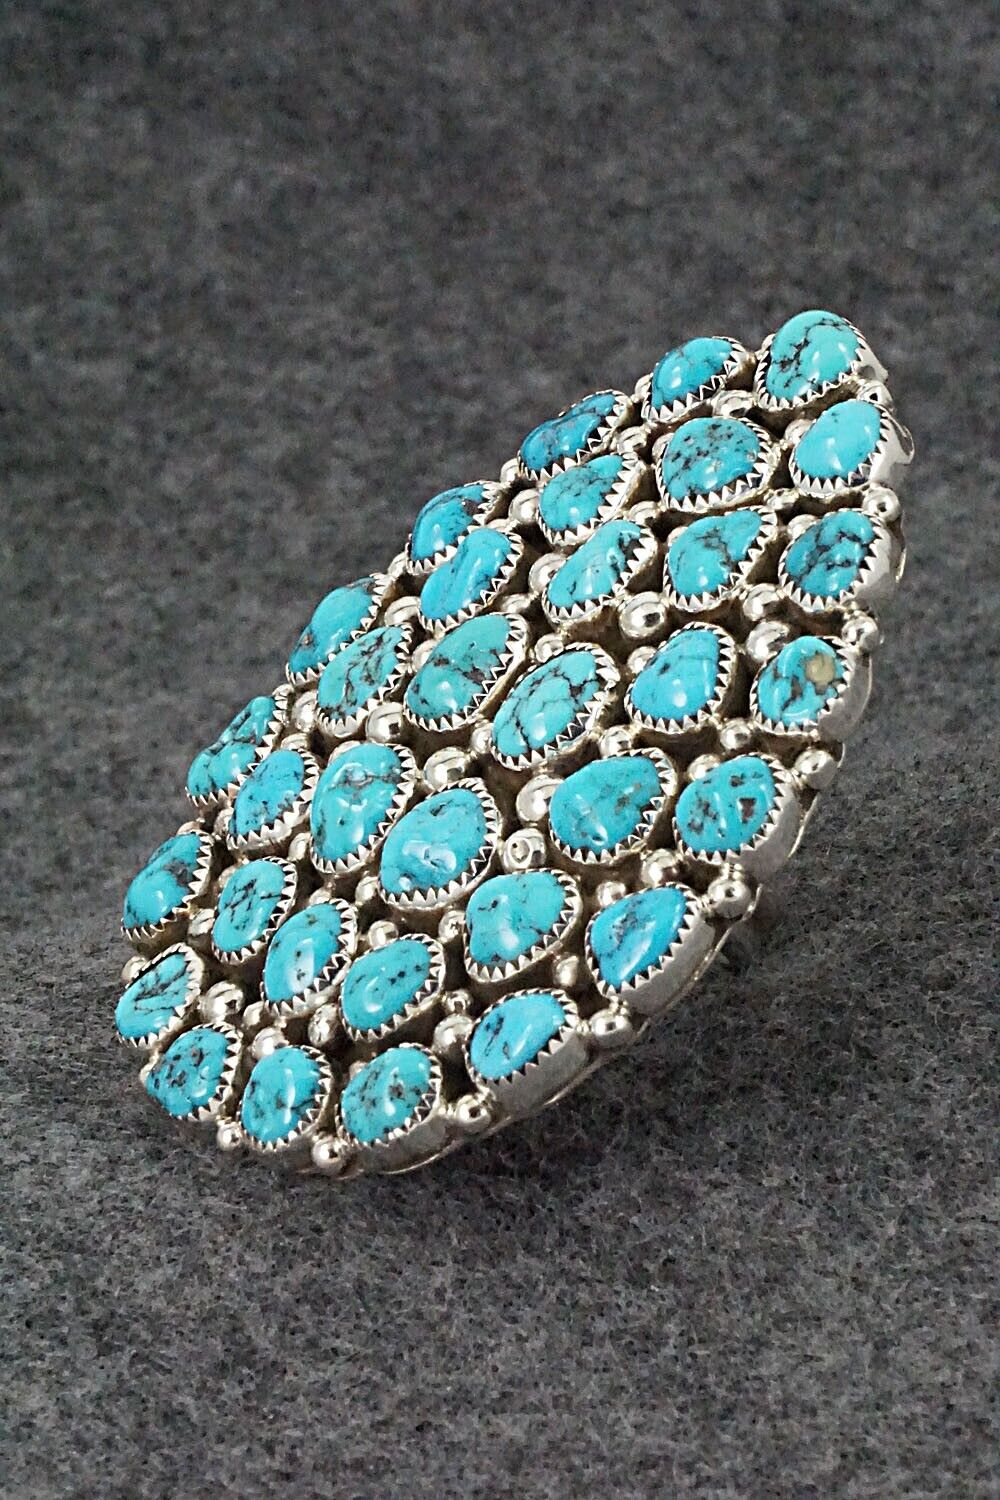 Turquoise and Sterling Silver Ring - Marlene Haley - Size 7 (adj.)